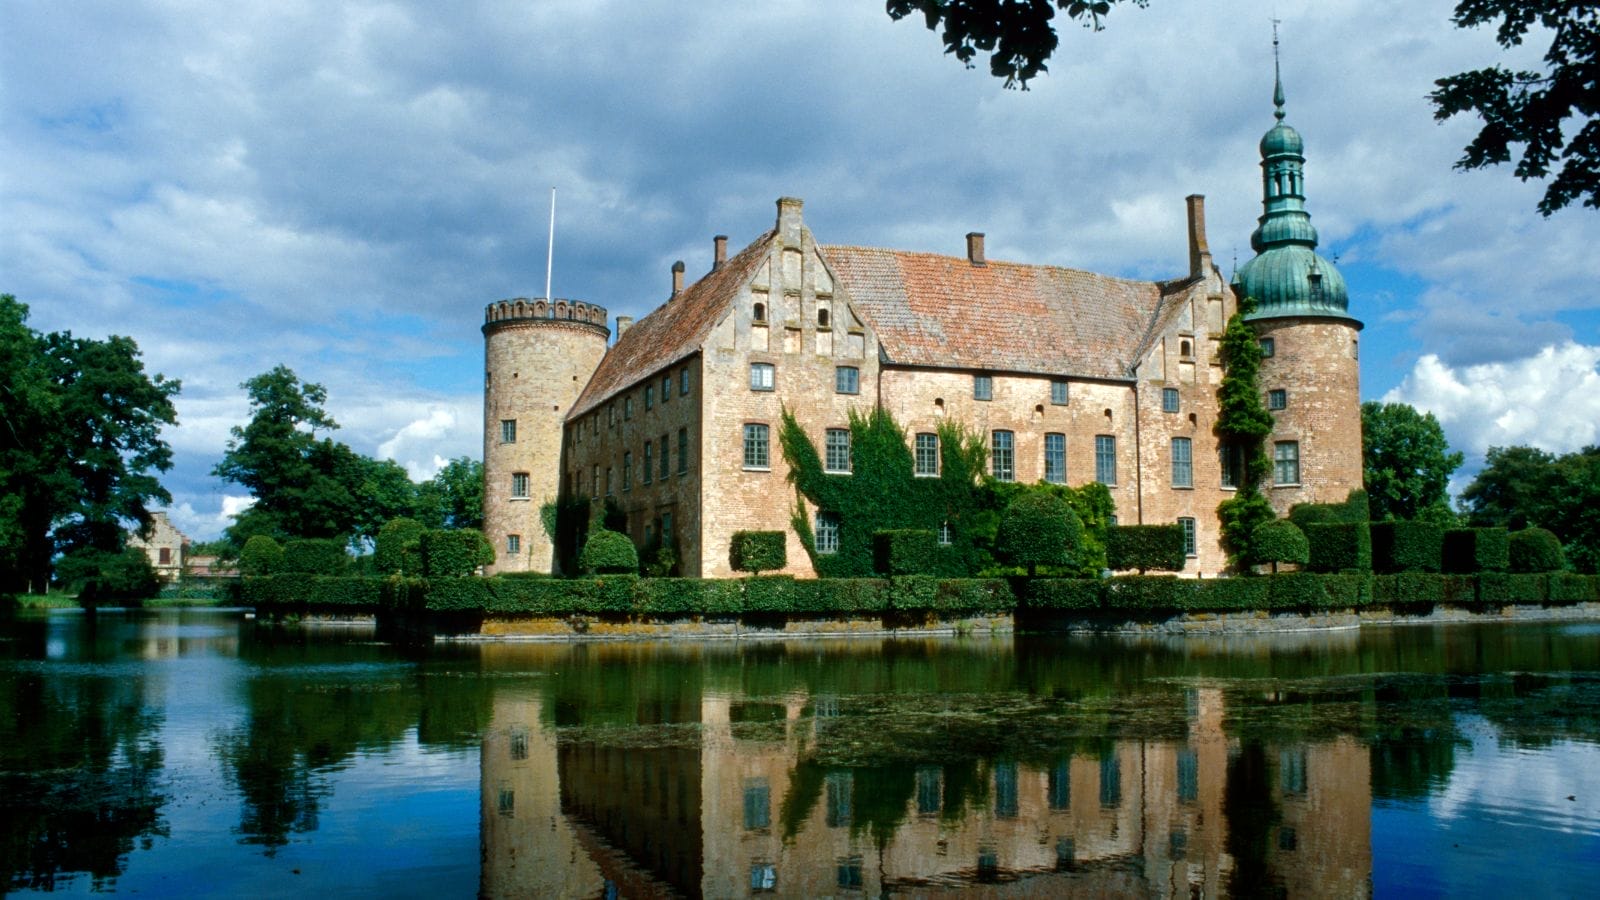 A large stone building with a tower and a moat